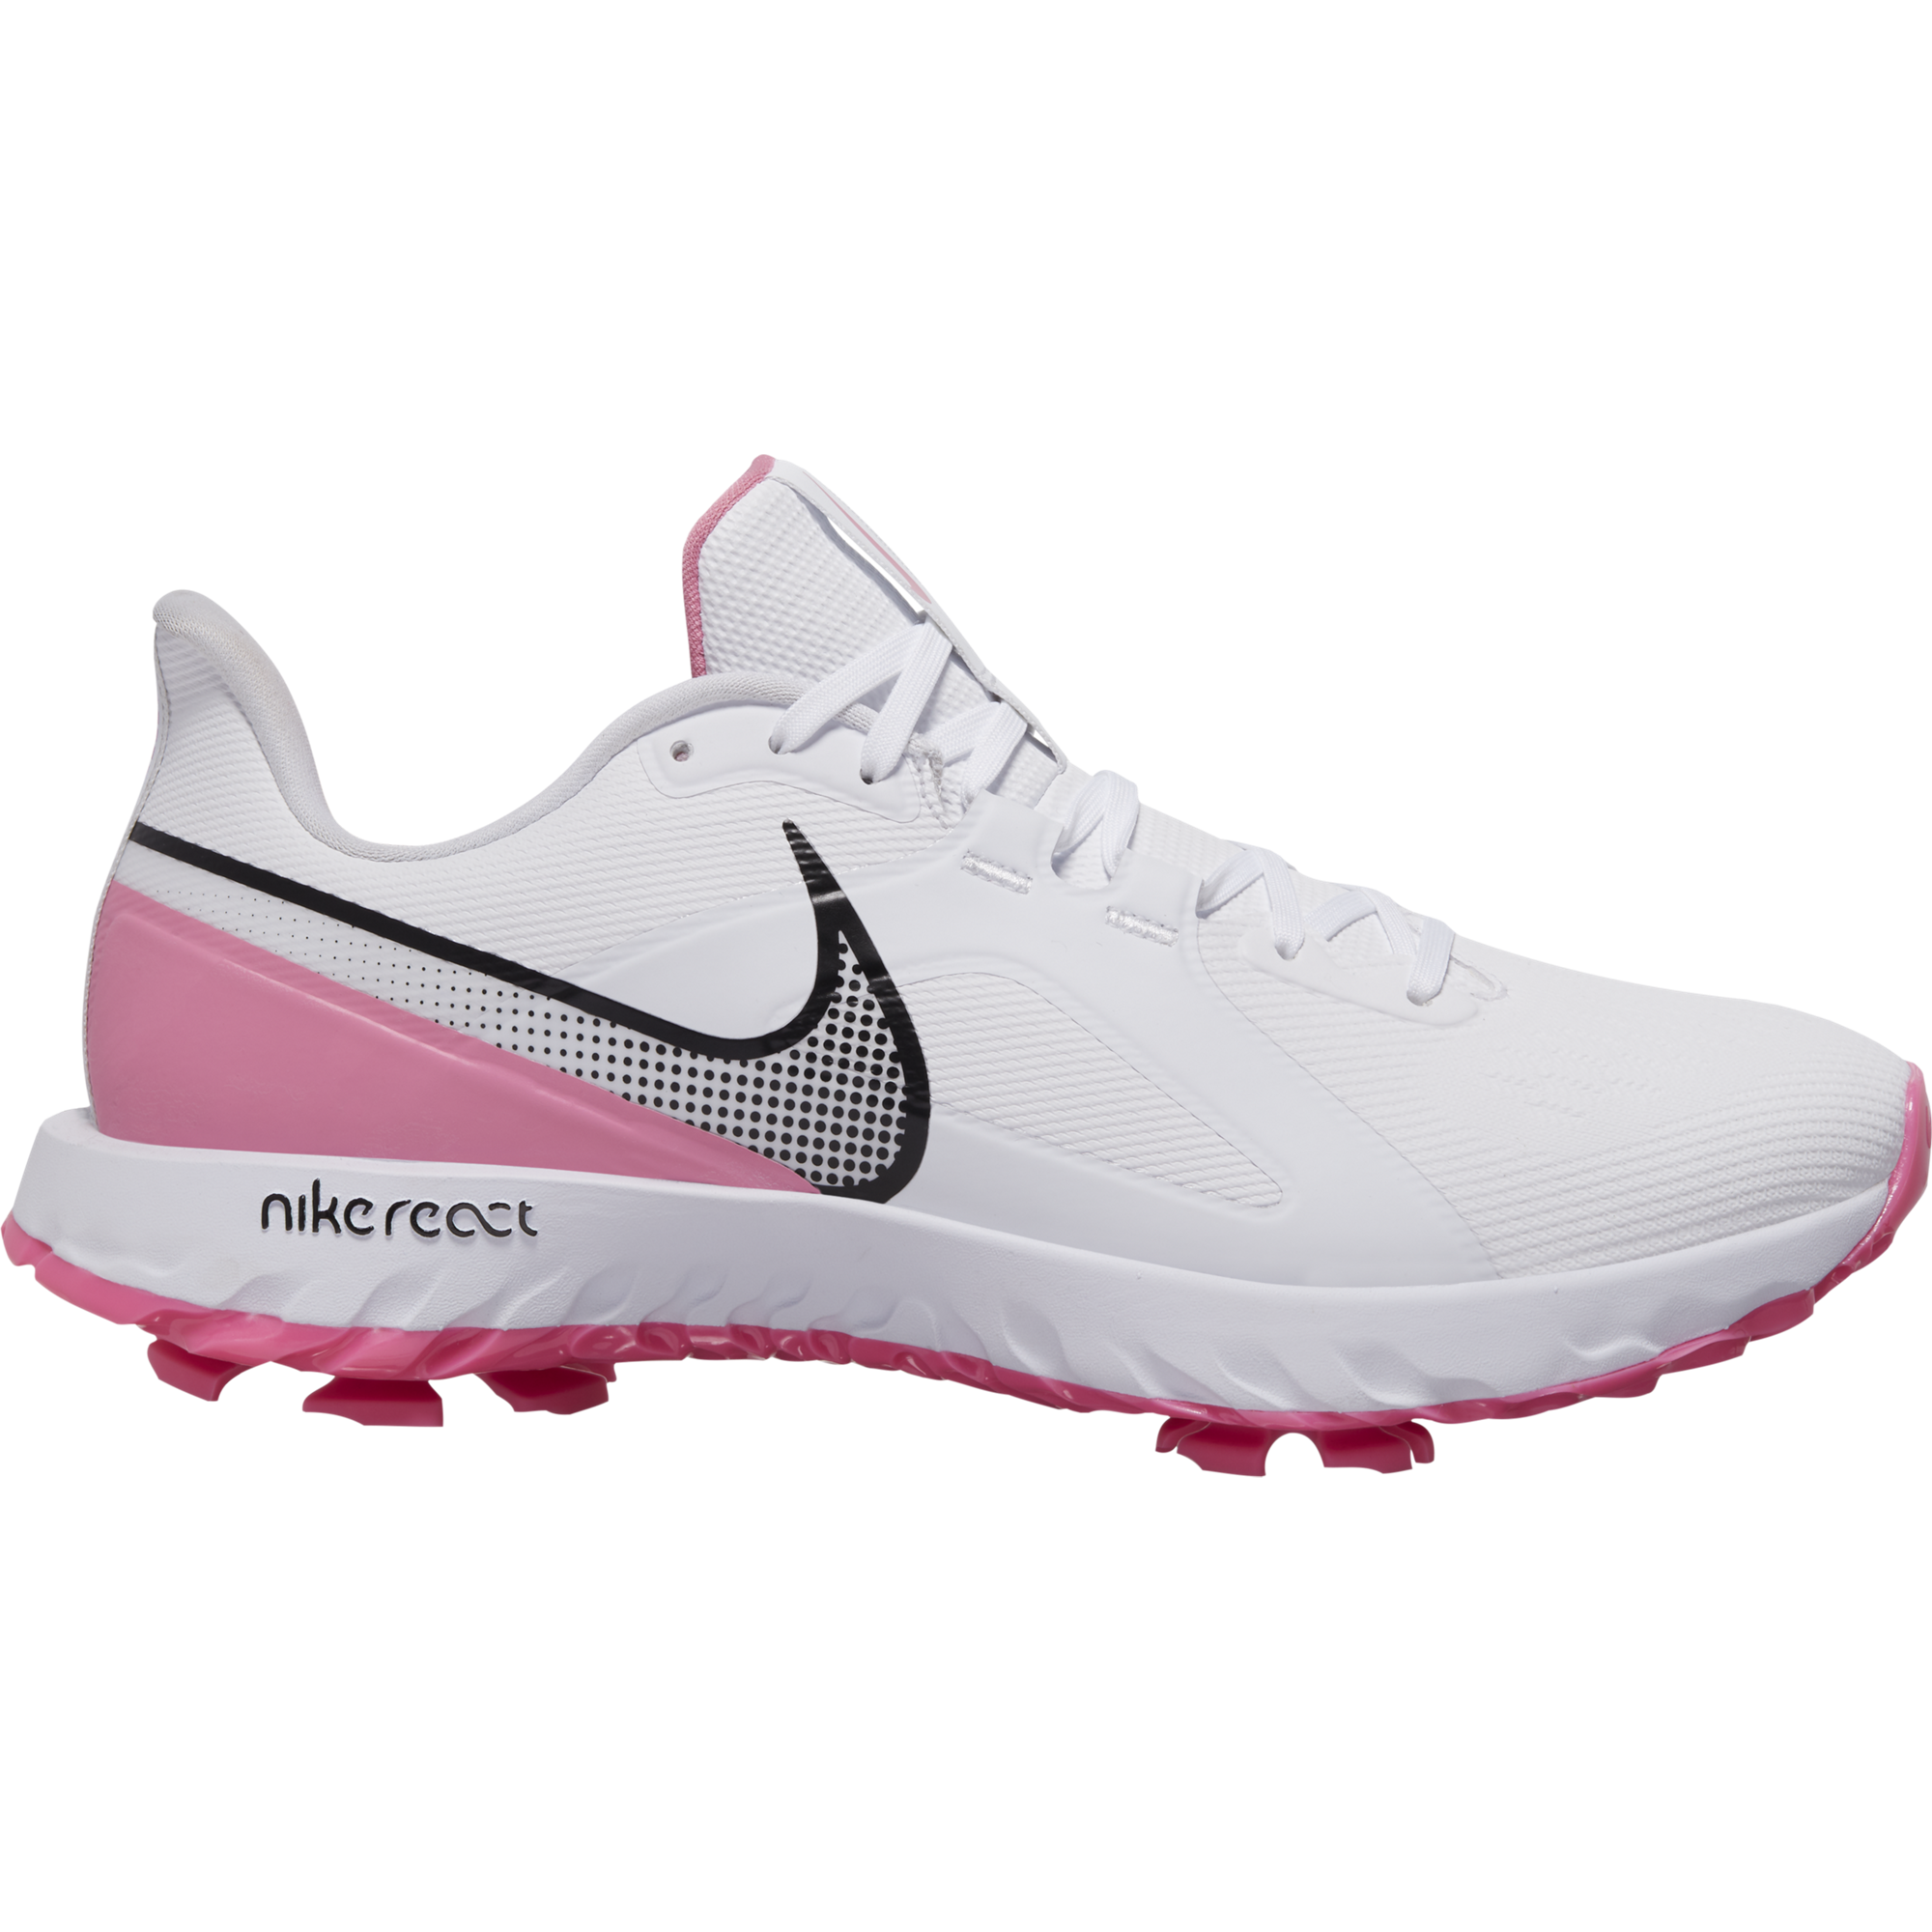 Nike React Infinity Pro Golf Shoes White/Infrared 23/Black Carl's ...